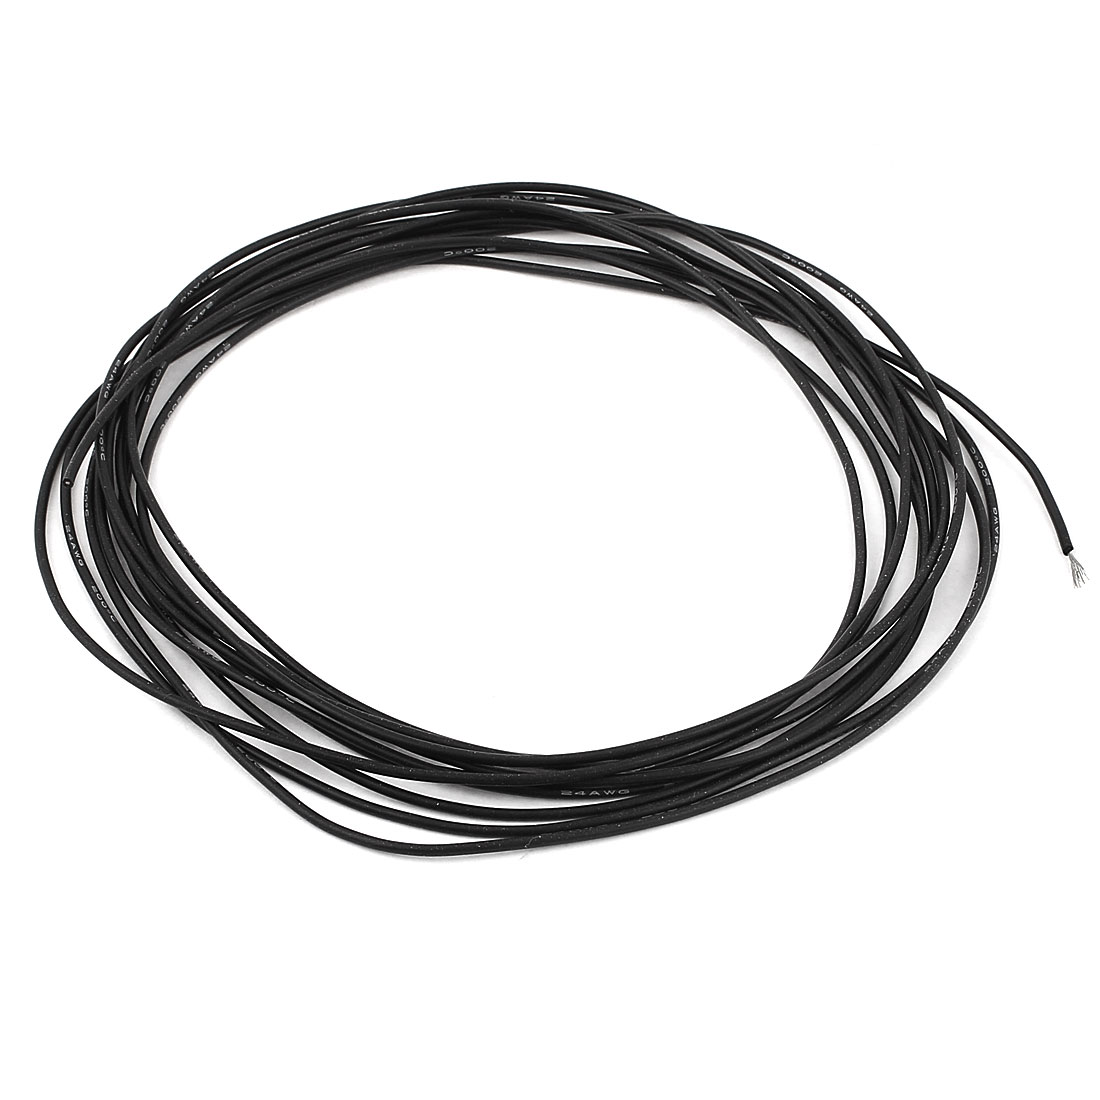 Buy 28 AWG Silicone Wire 3M Black at the Best Price Online in India